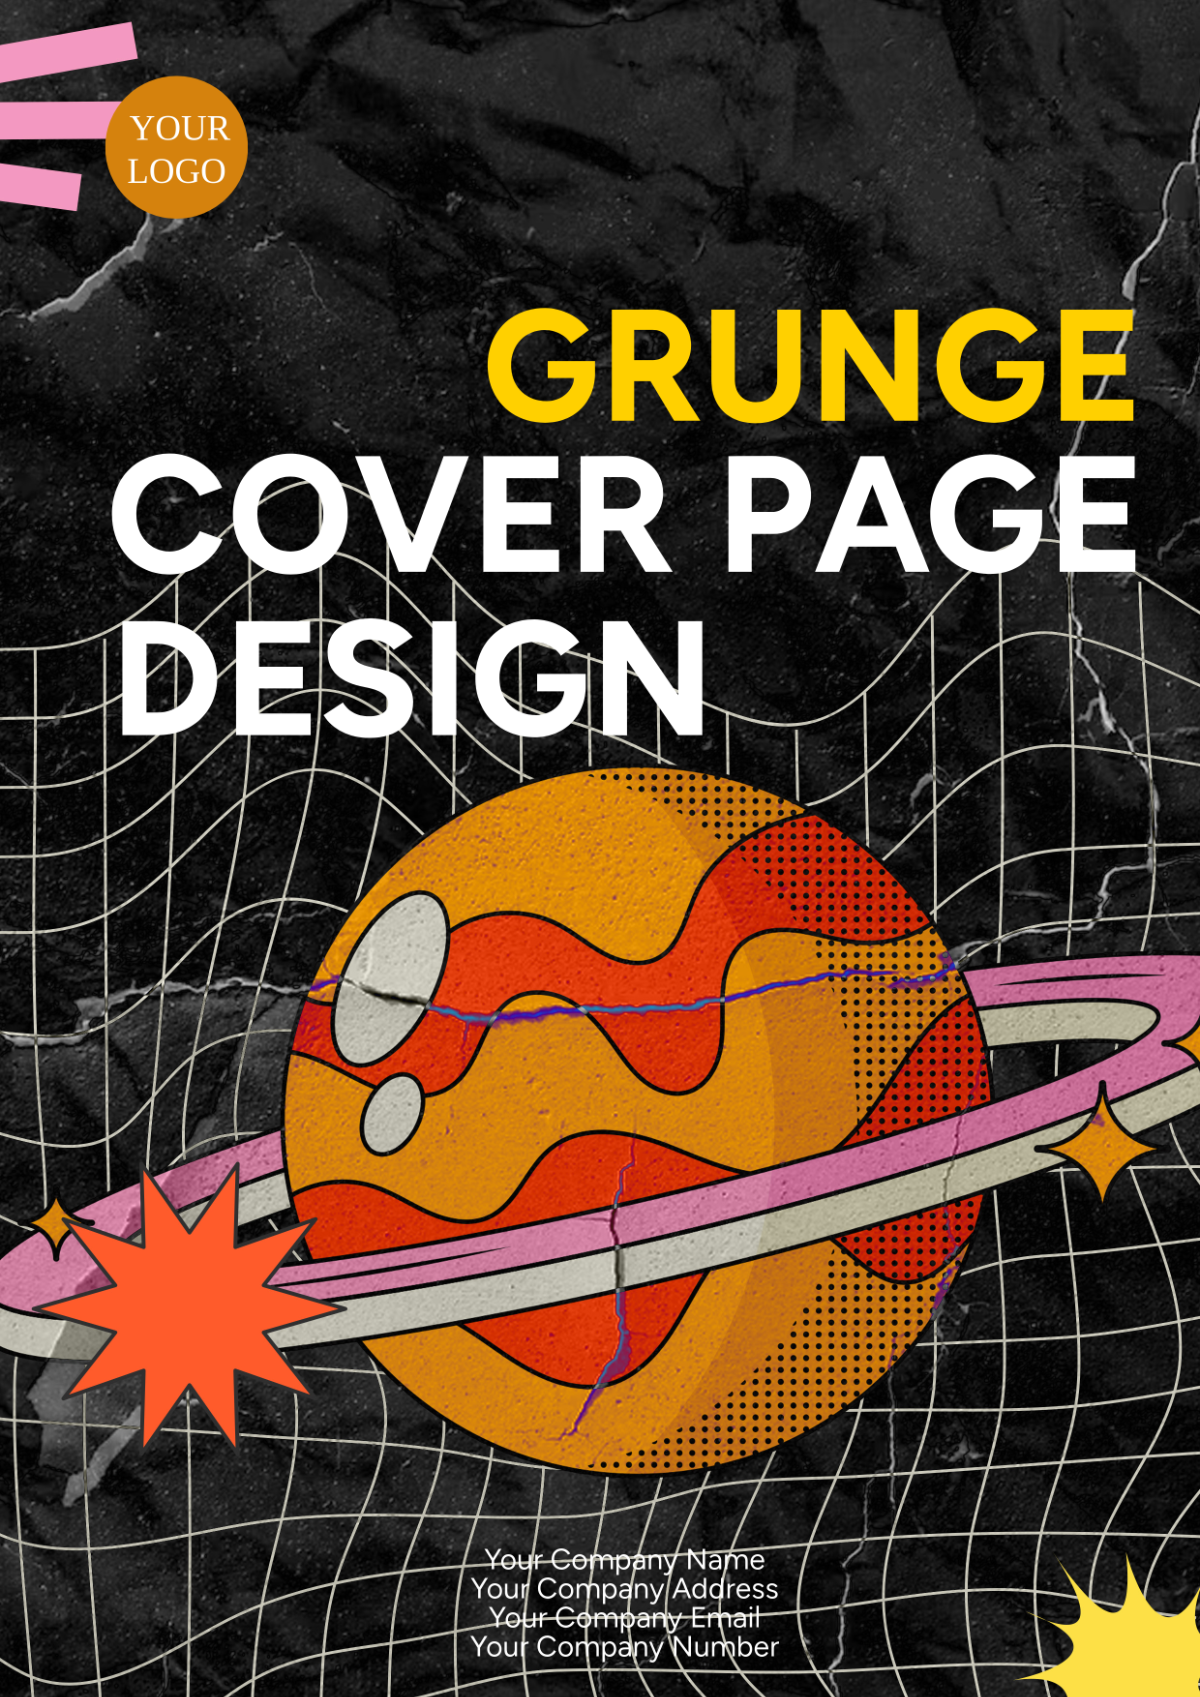 Grunge Cover Page Design